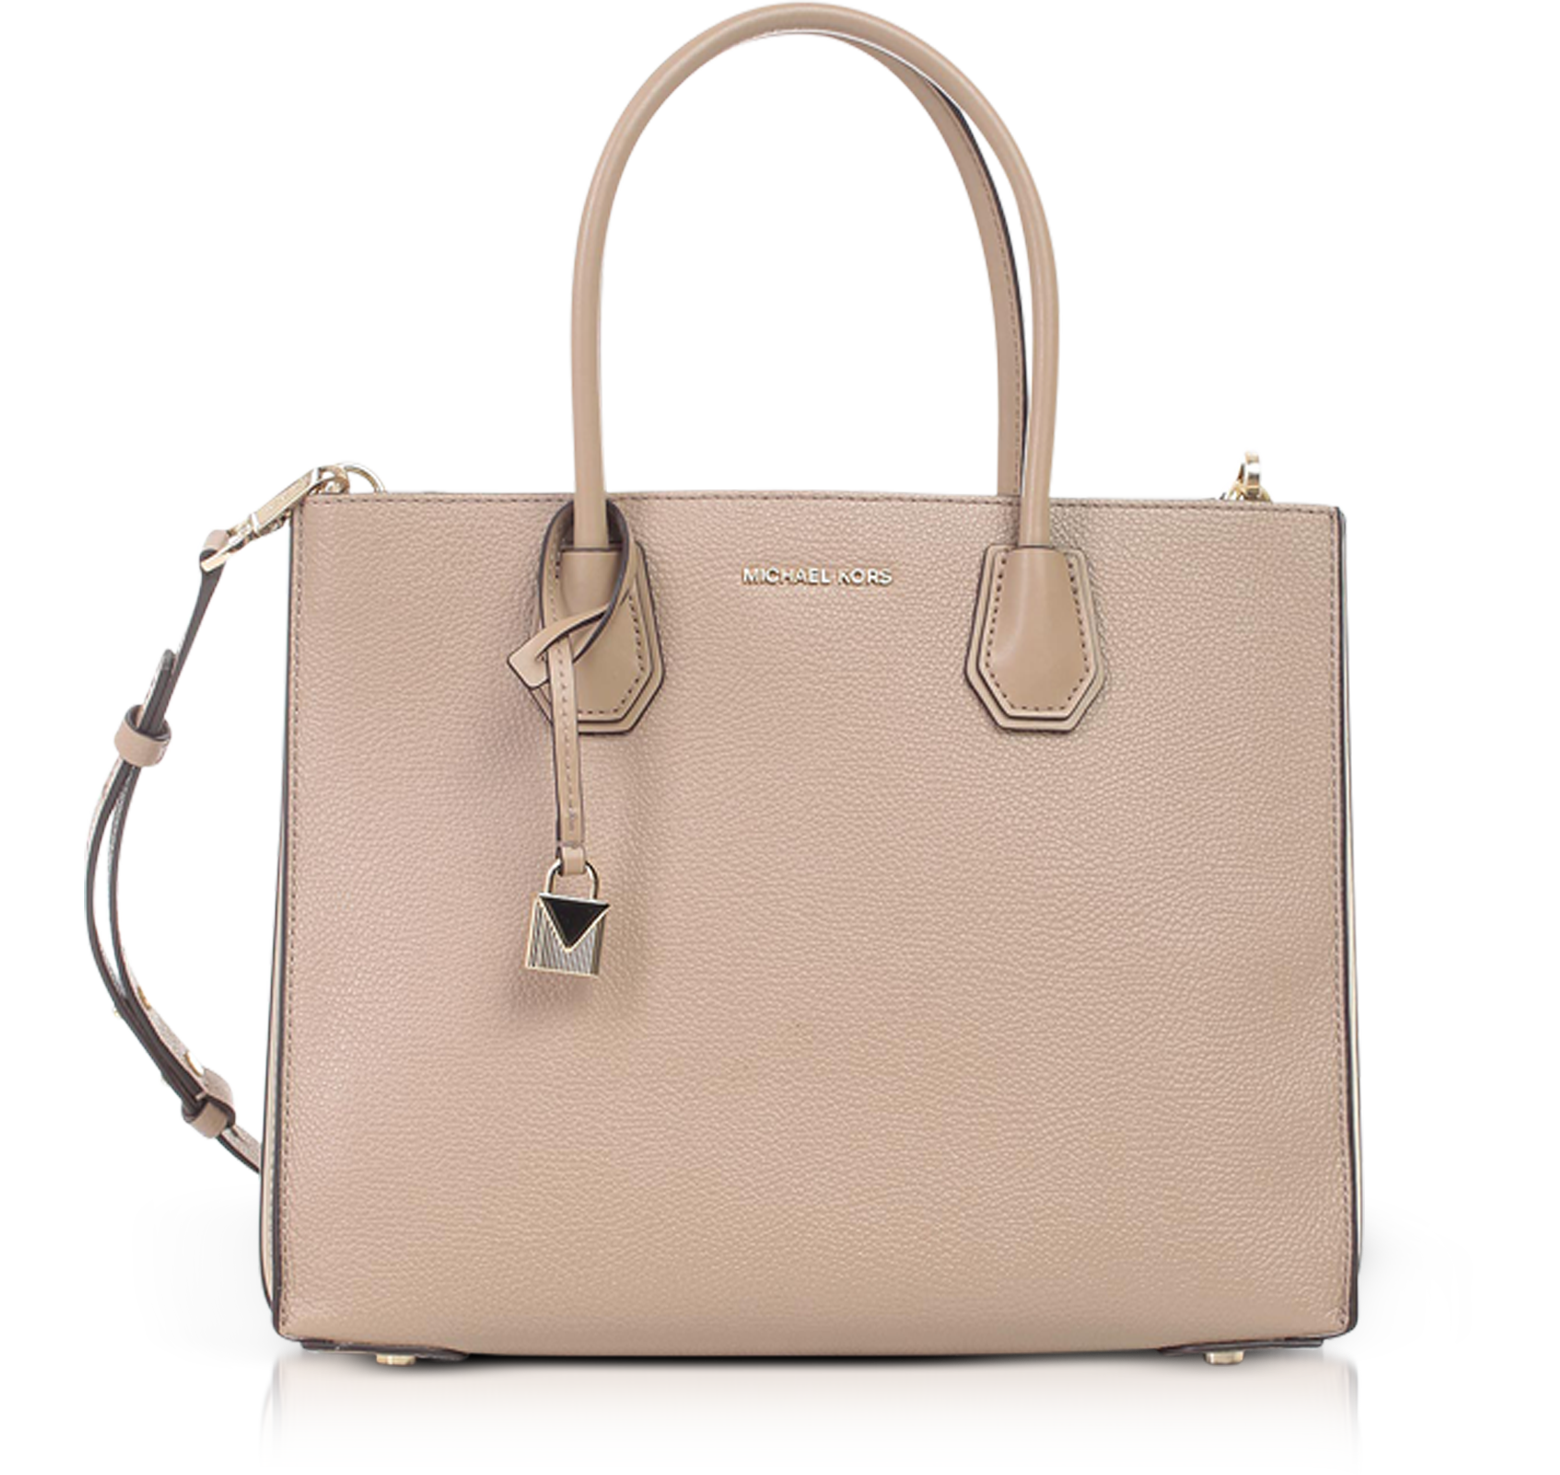 mercer pebbled leather tote